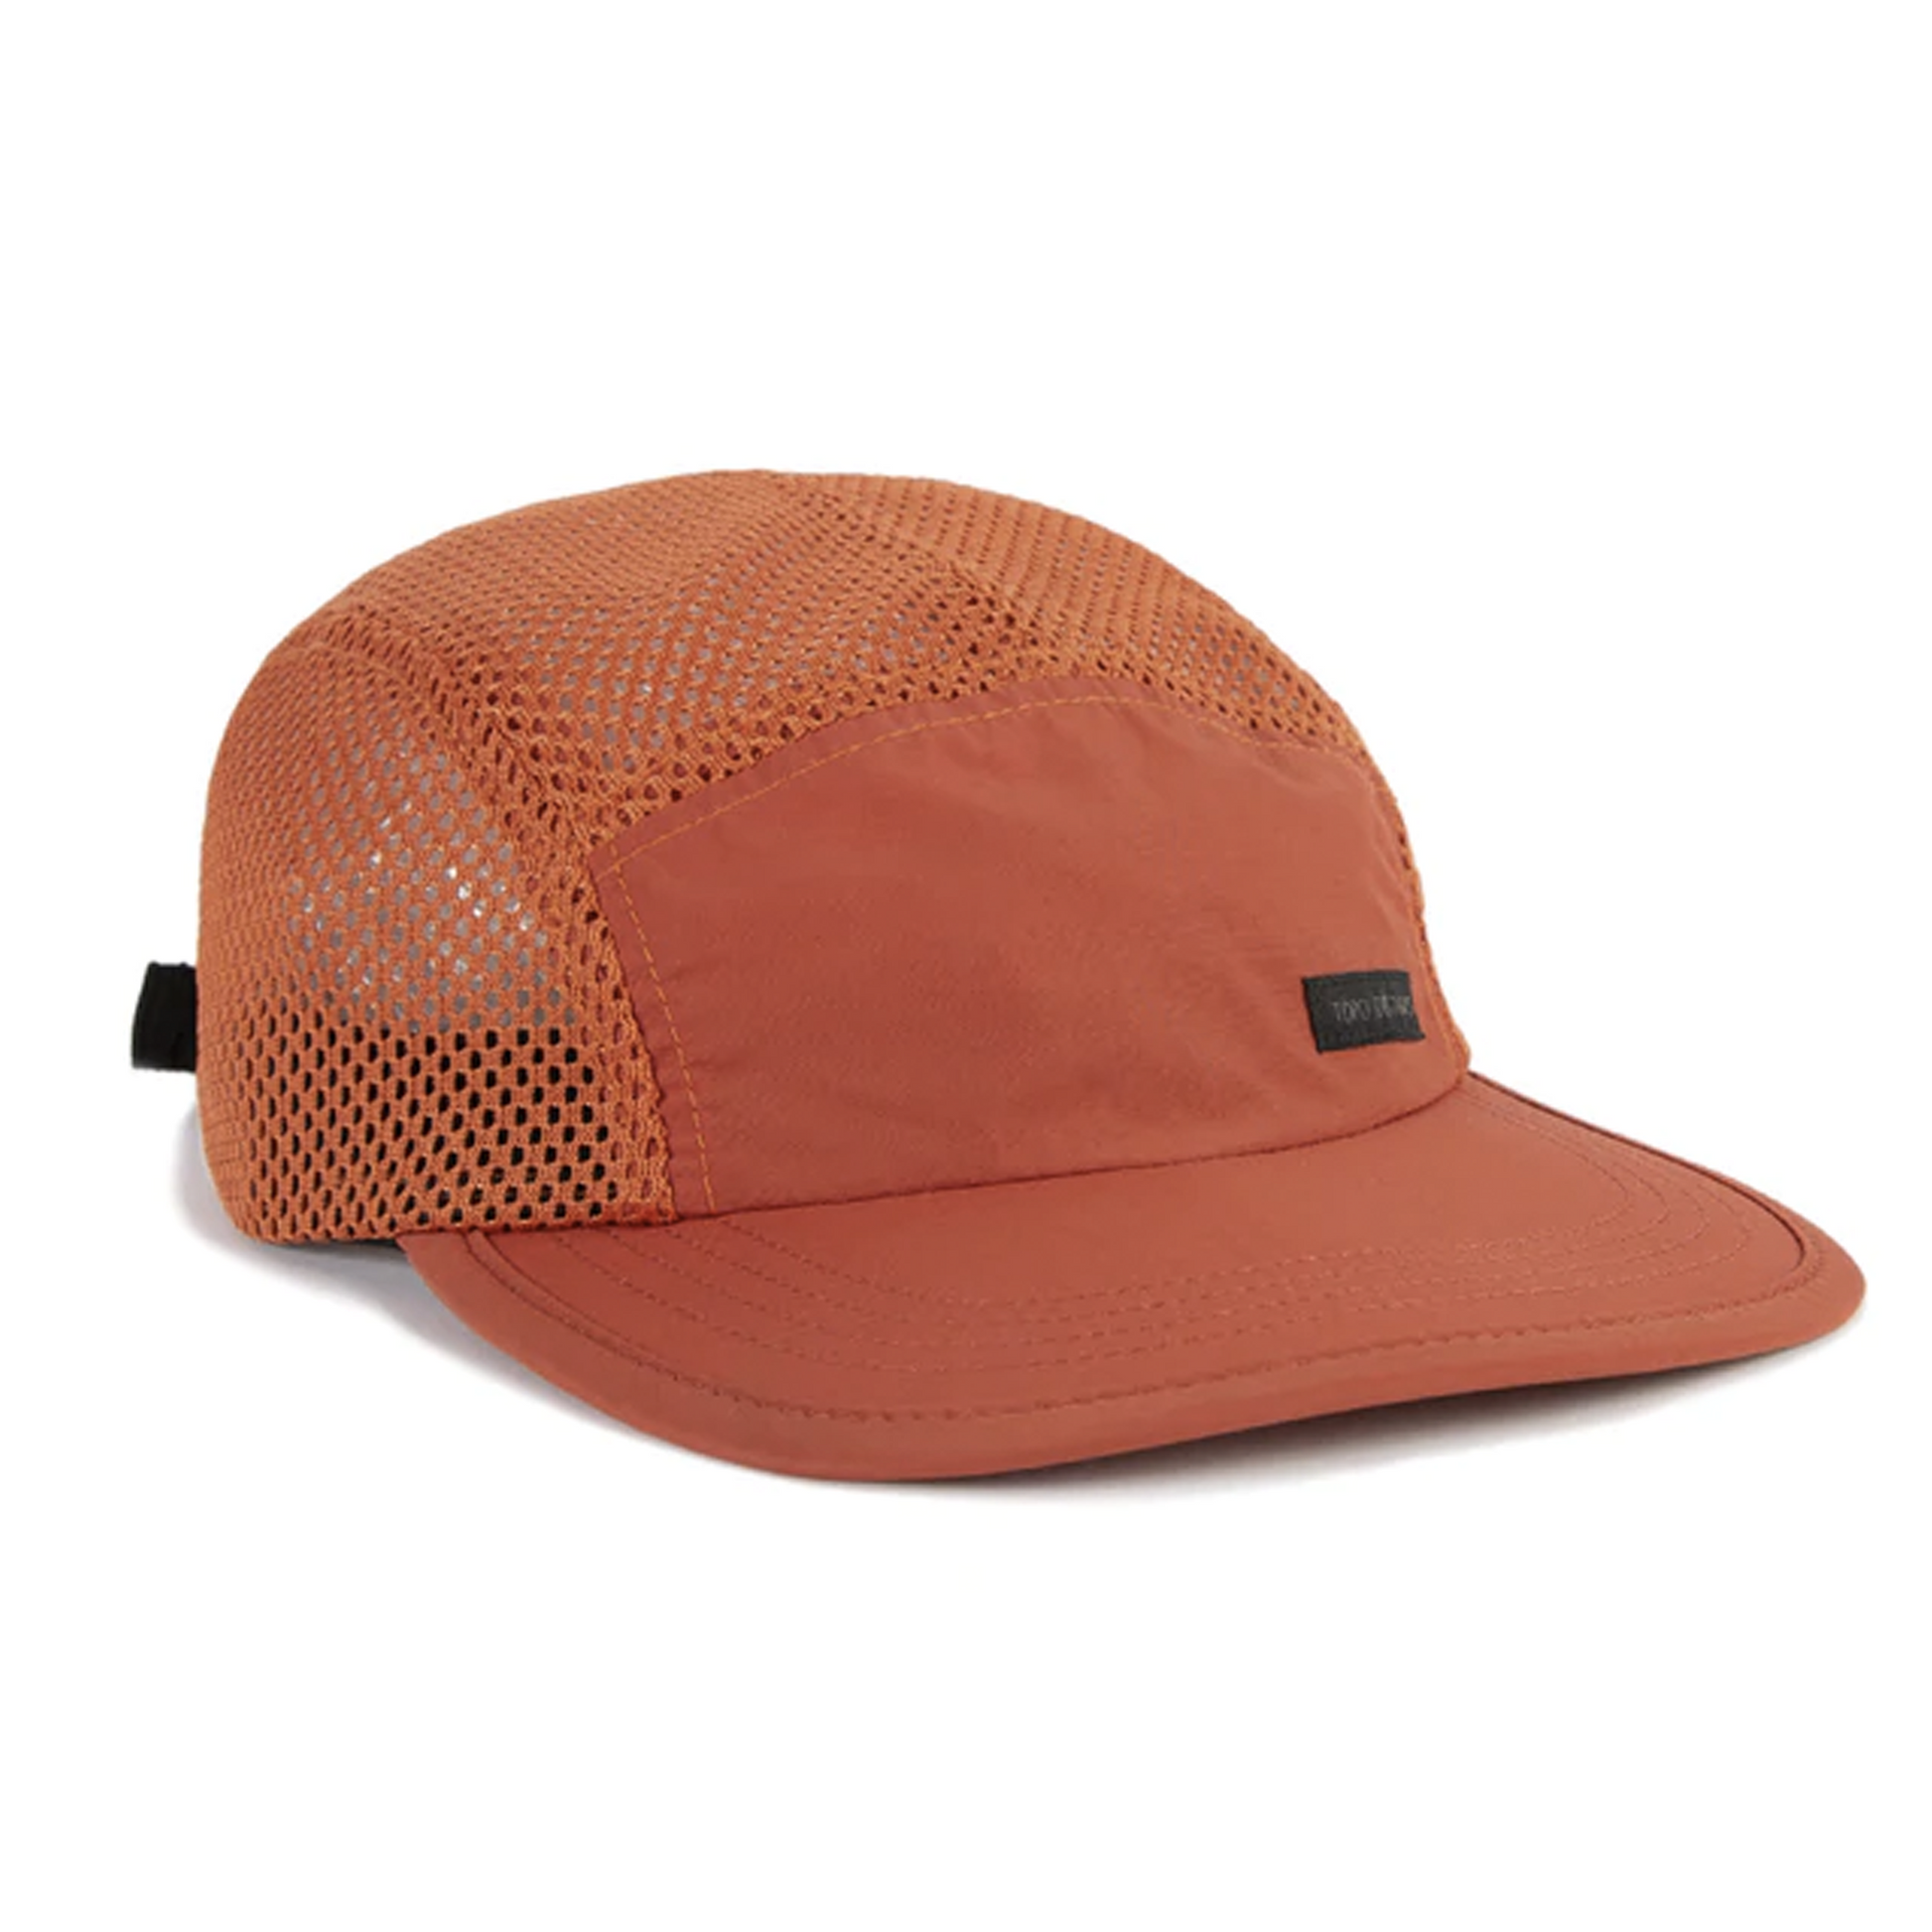 Global Hat Big Adventure Outfitters